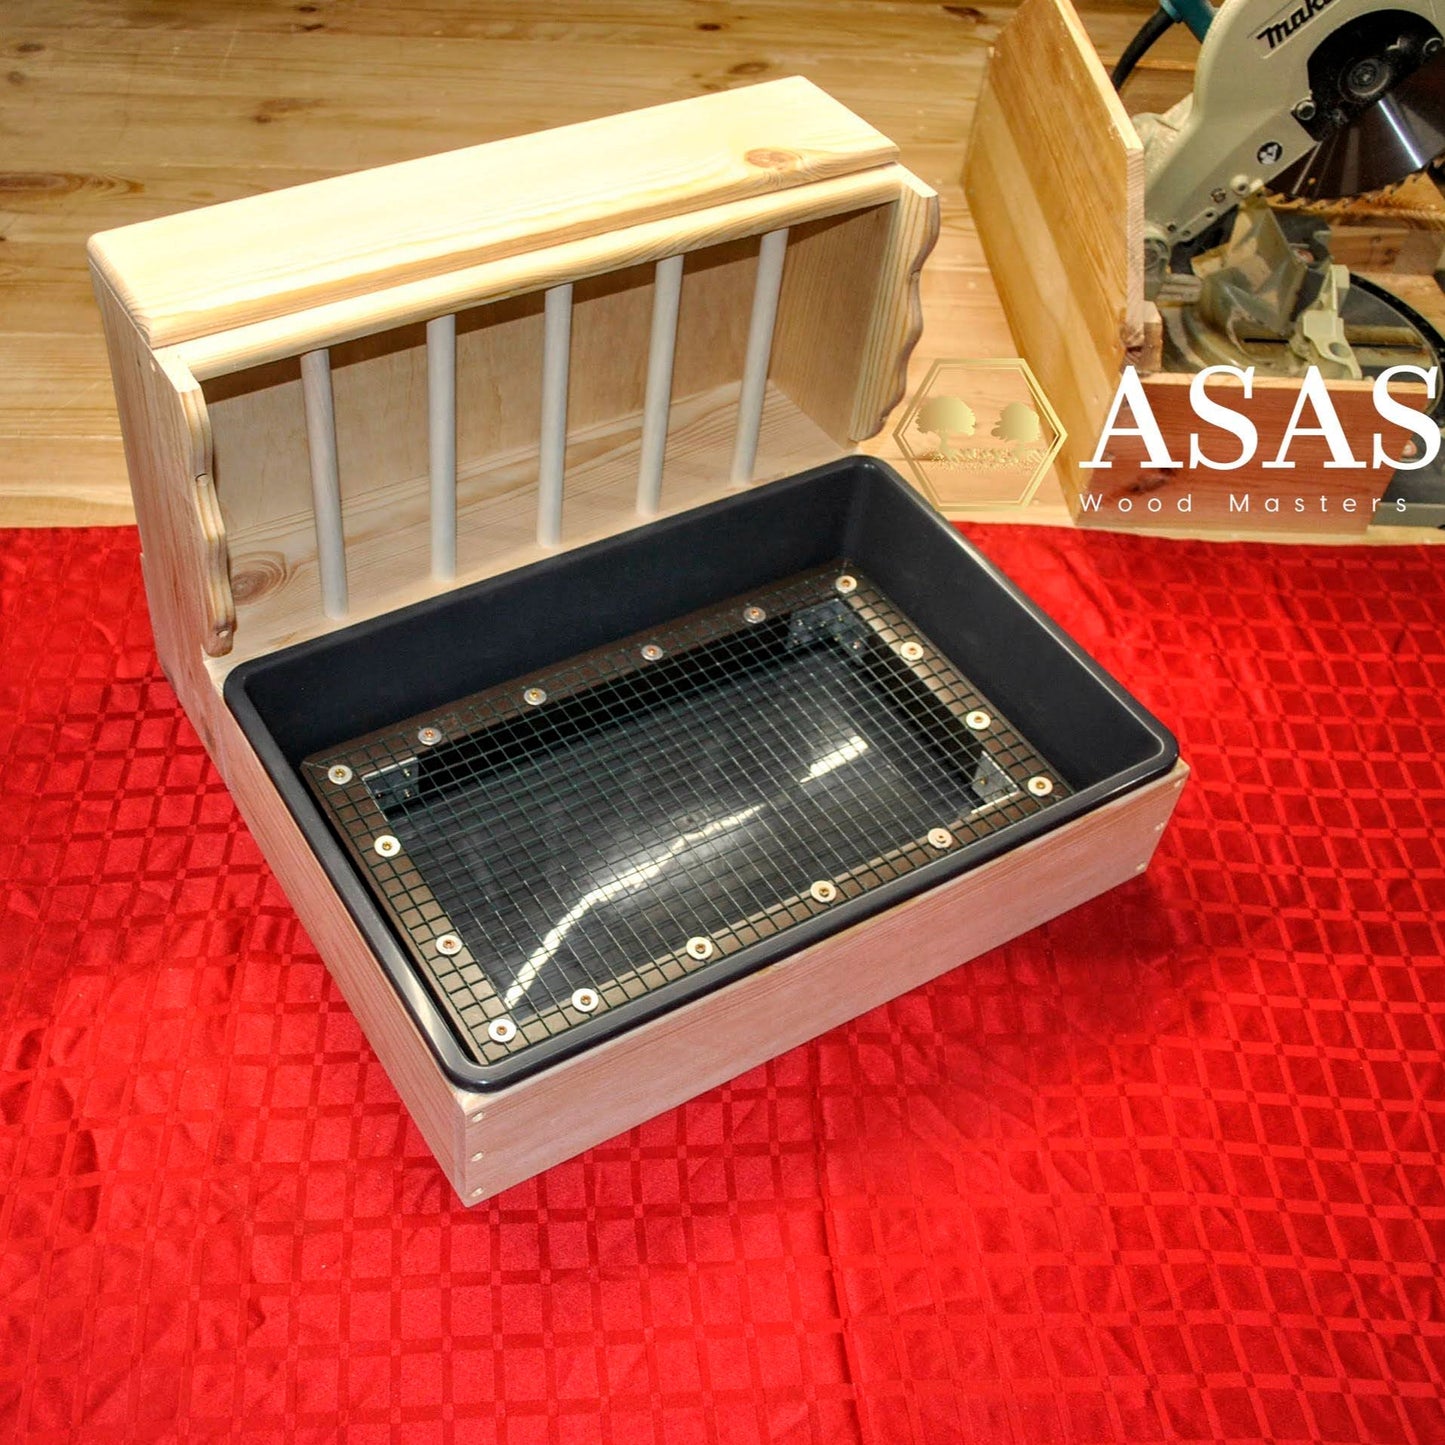 Rabbit hay feeder with litter box large size, wire mesh insert, made by asaswood